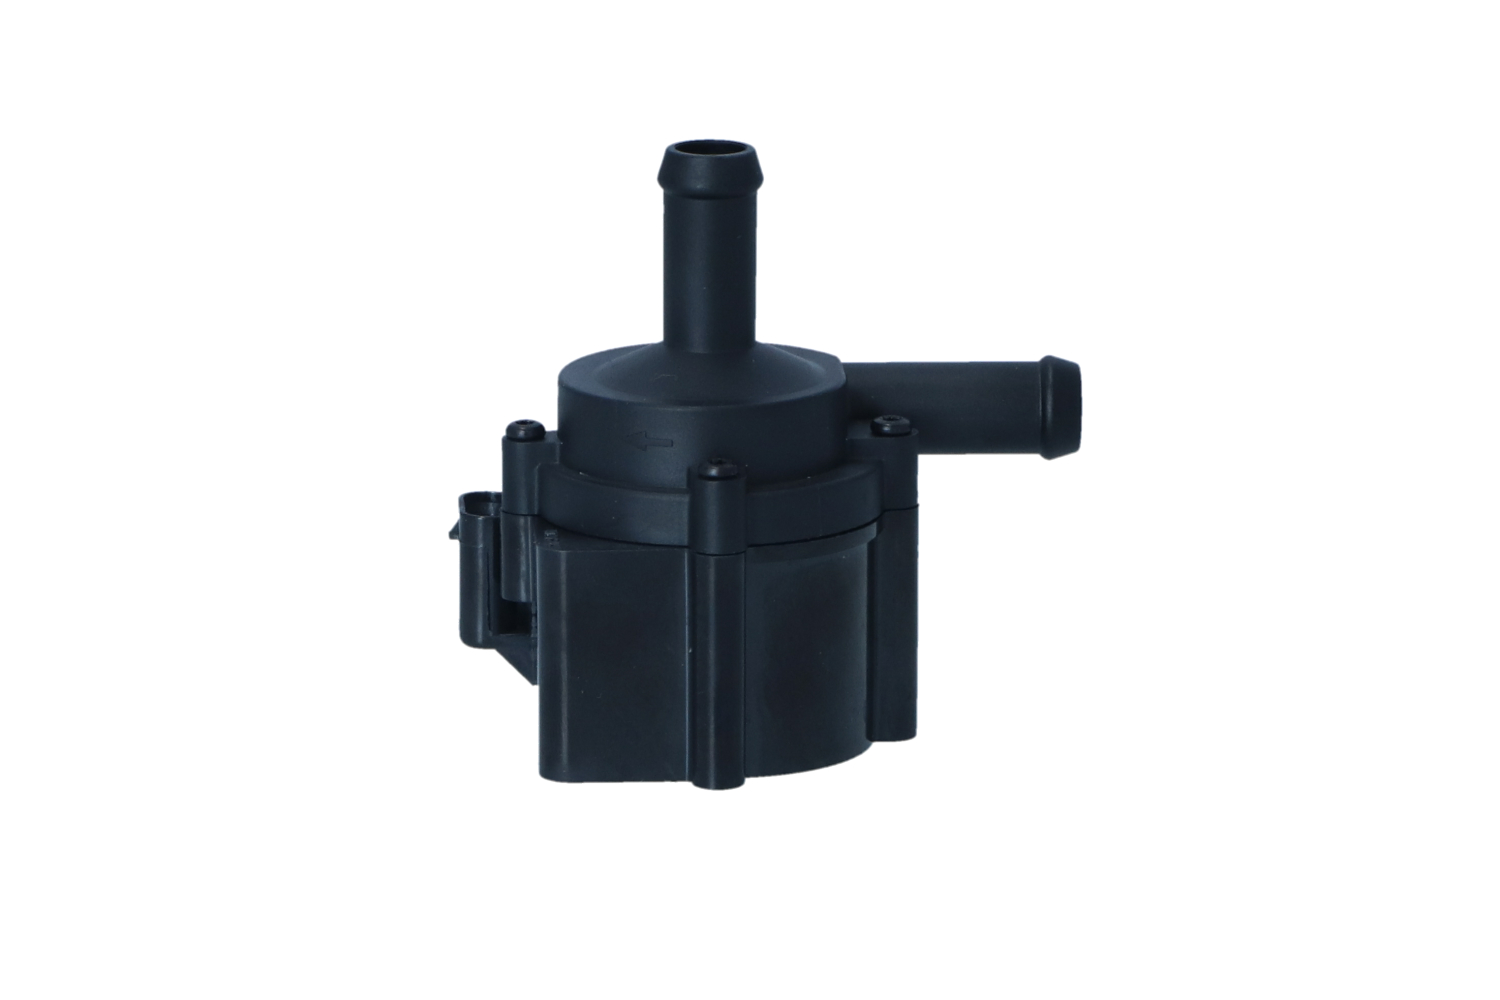 Ford Auxiliary water pump NRF 390035 at a good price